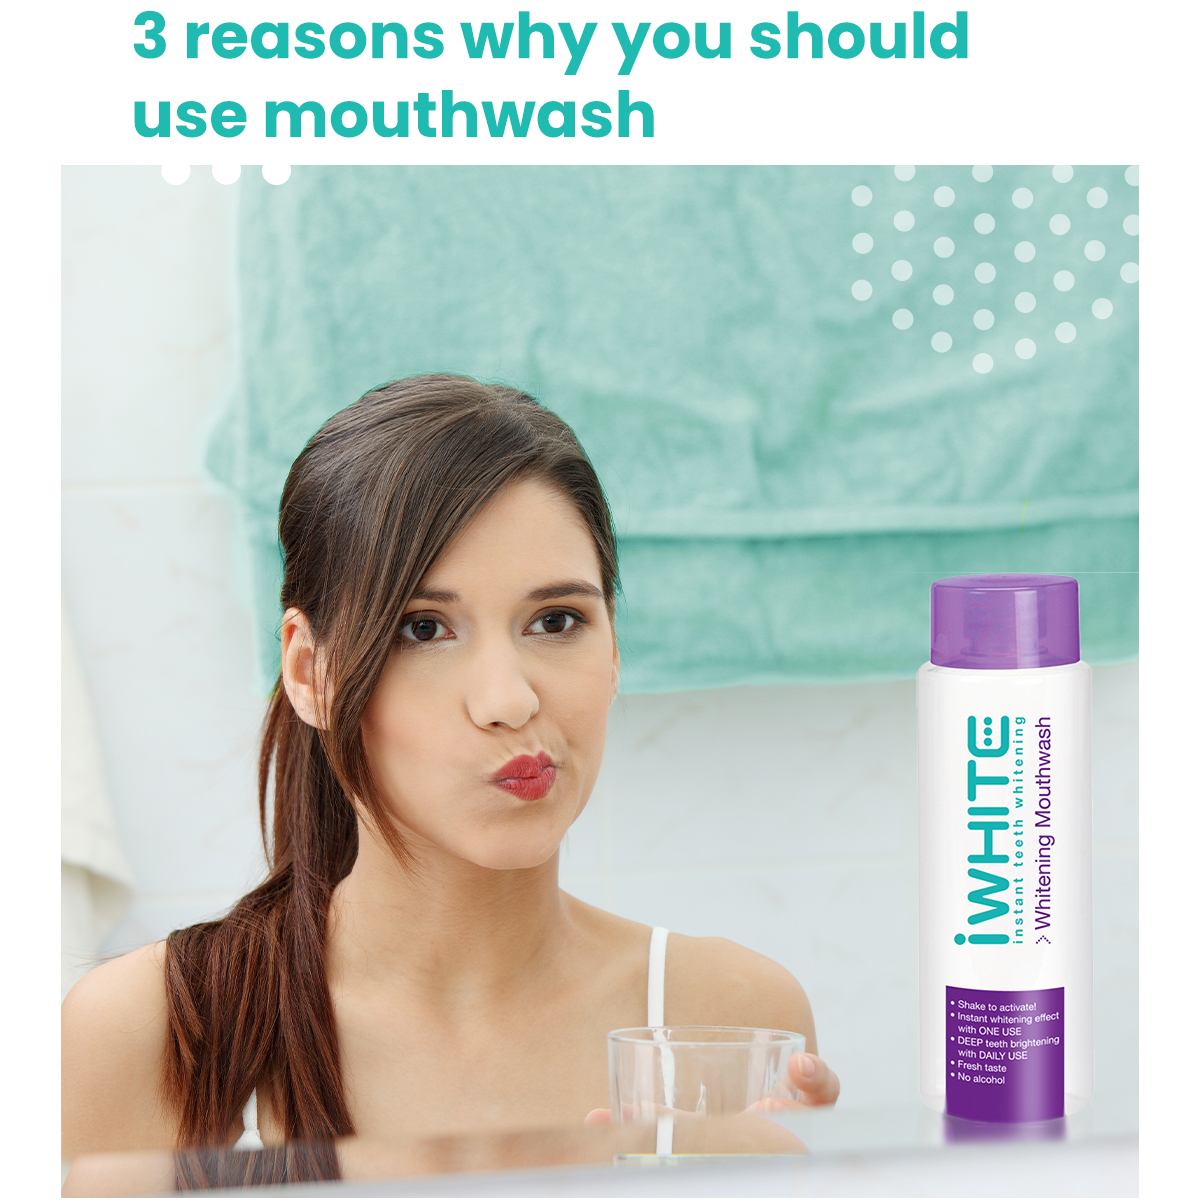 3 reasons why you should use mouthwash